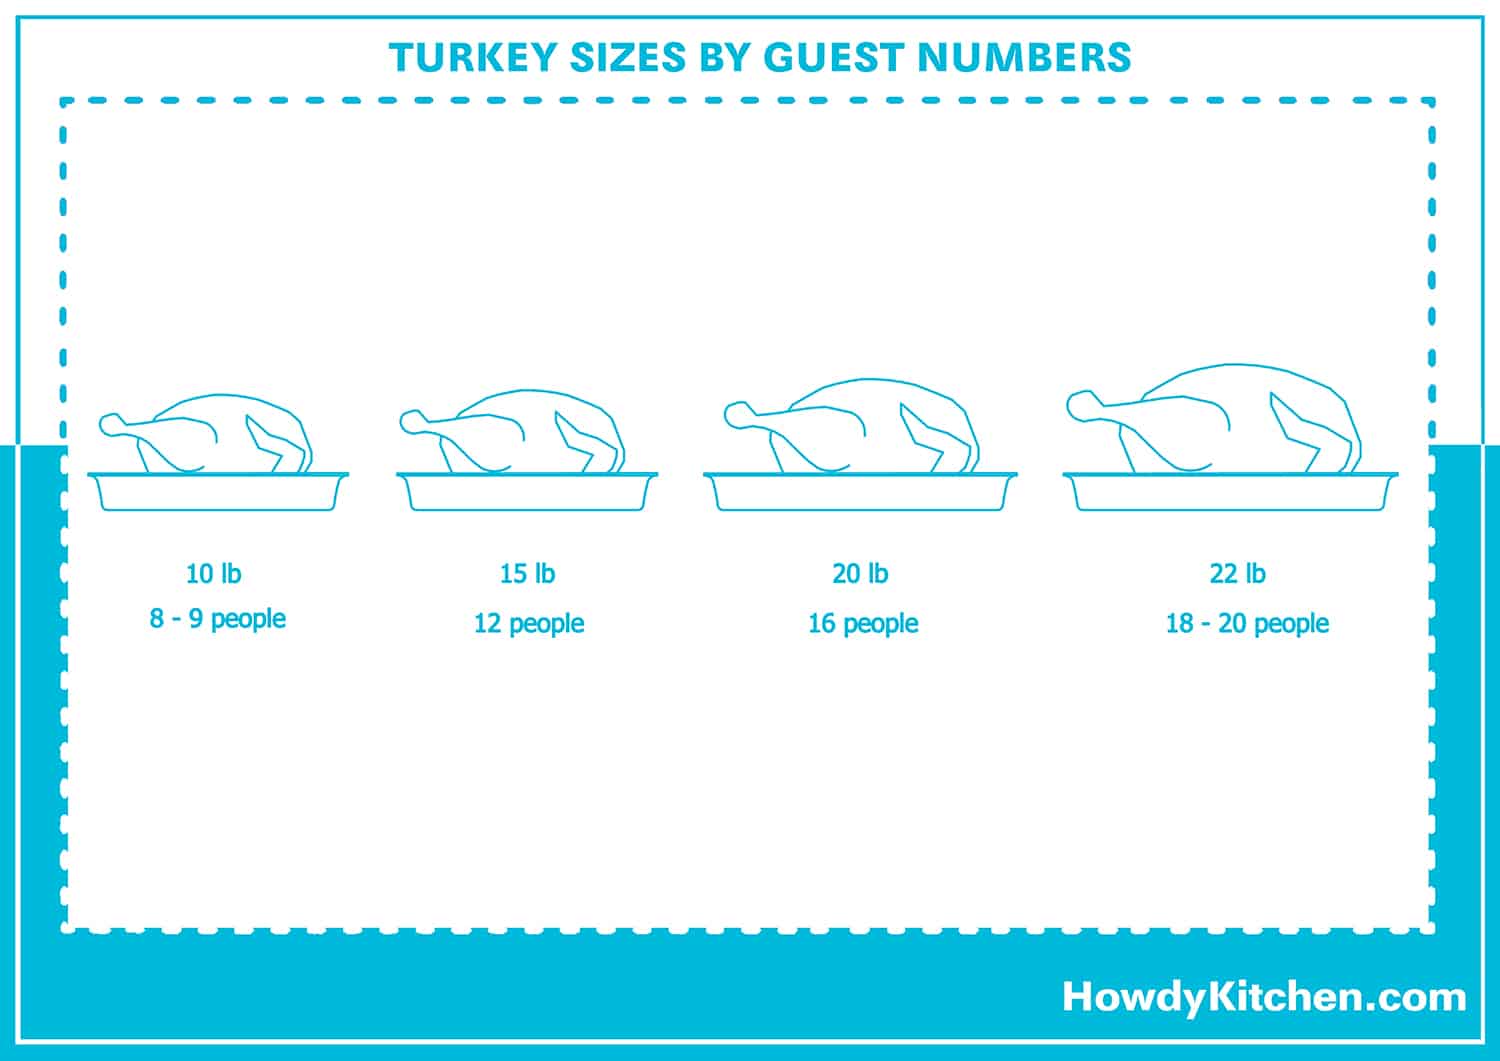 Turkey Sizes by Guest Numbers